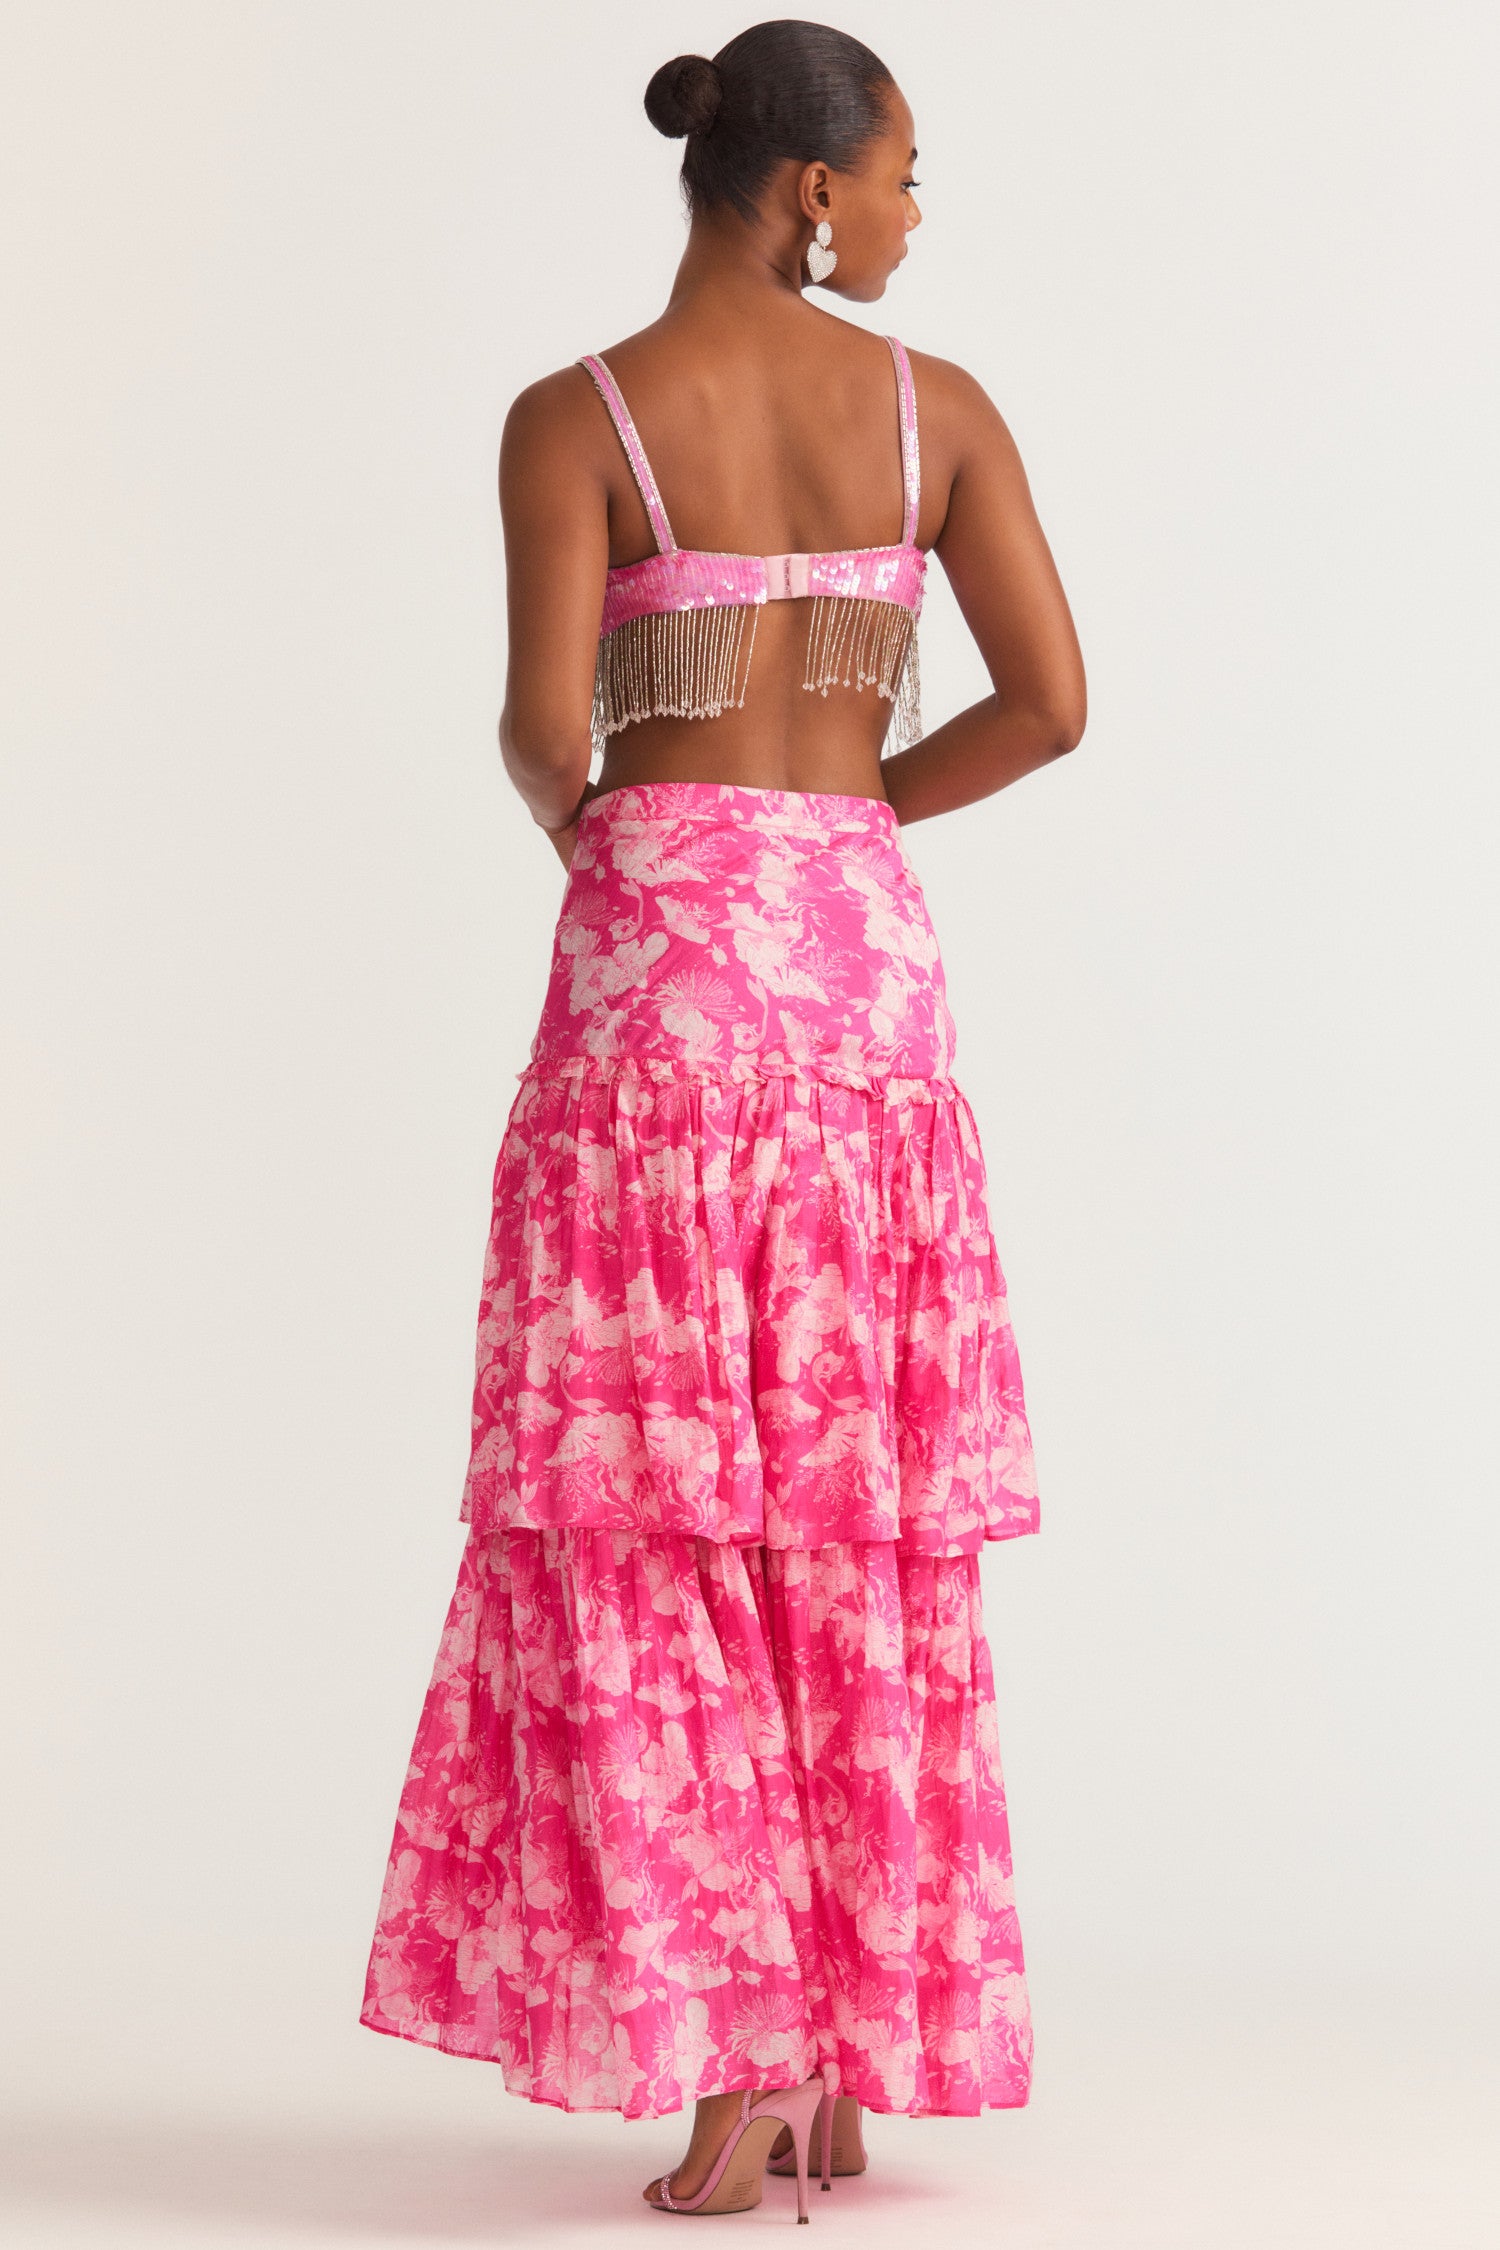 Womens pink floral cotton silk maxi skirt with leg slit and ruffle detailing.